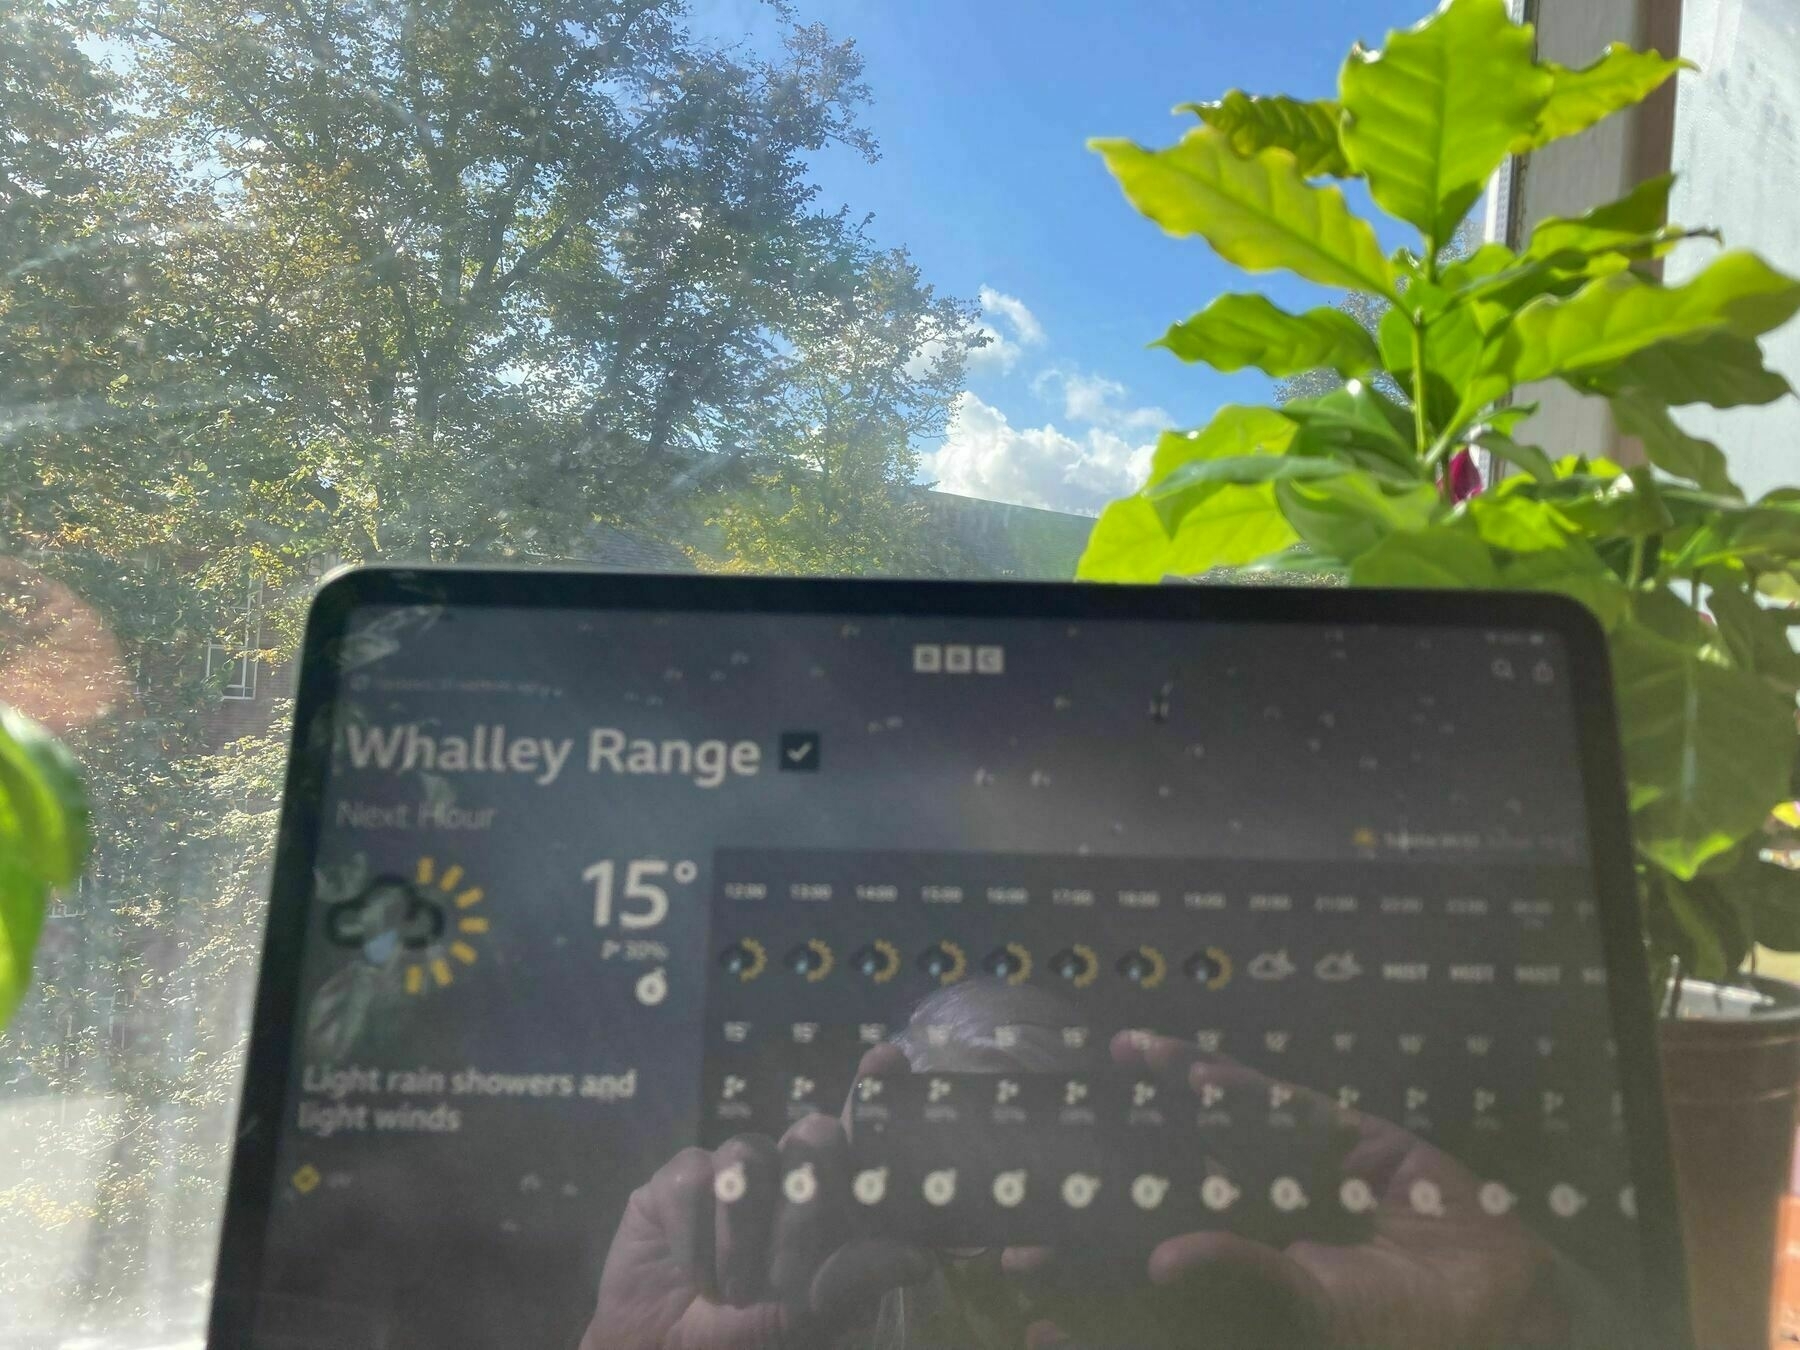 An iPad's weather app predicting a rainy day whilst there is blue sky and sunshine visible outside